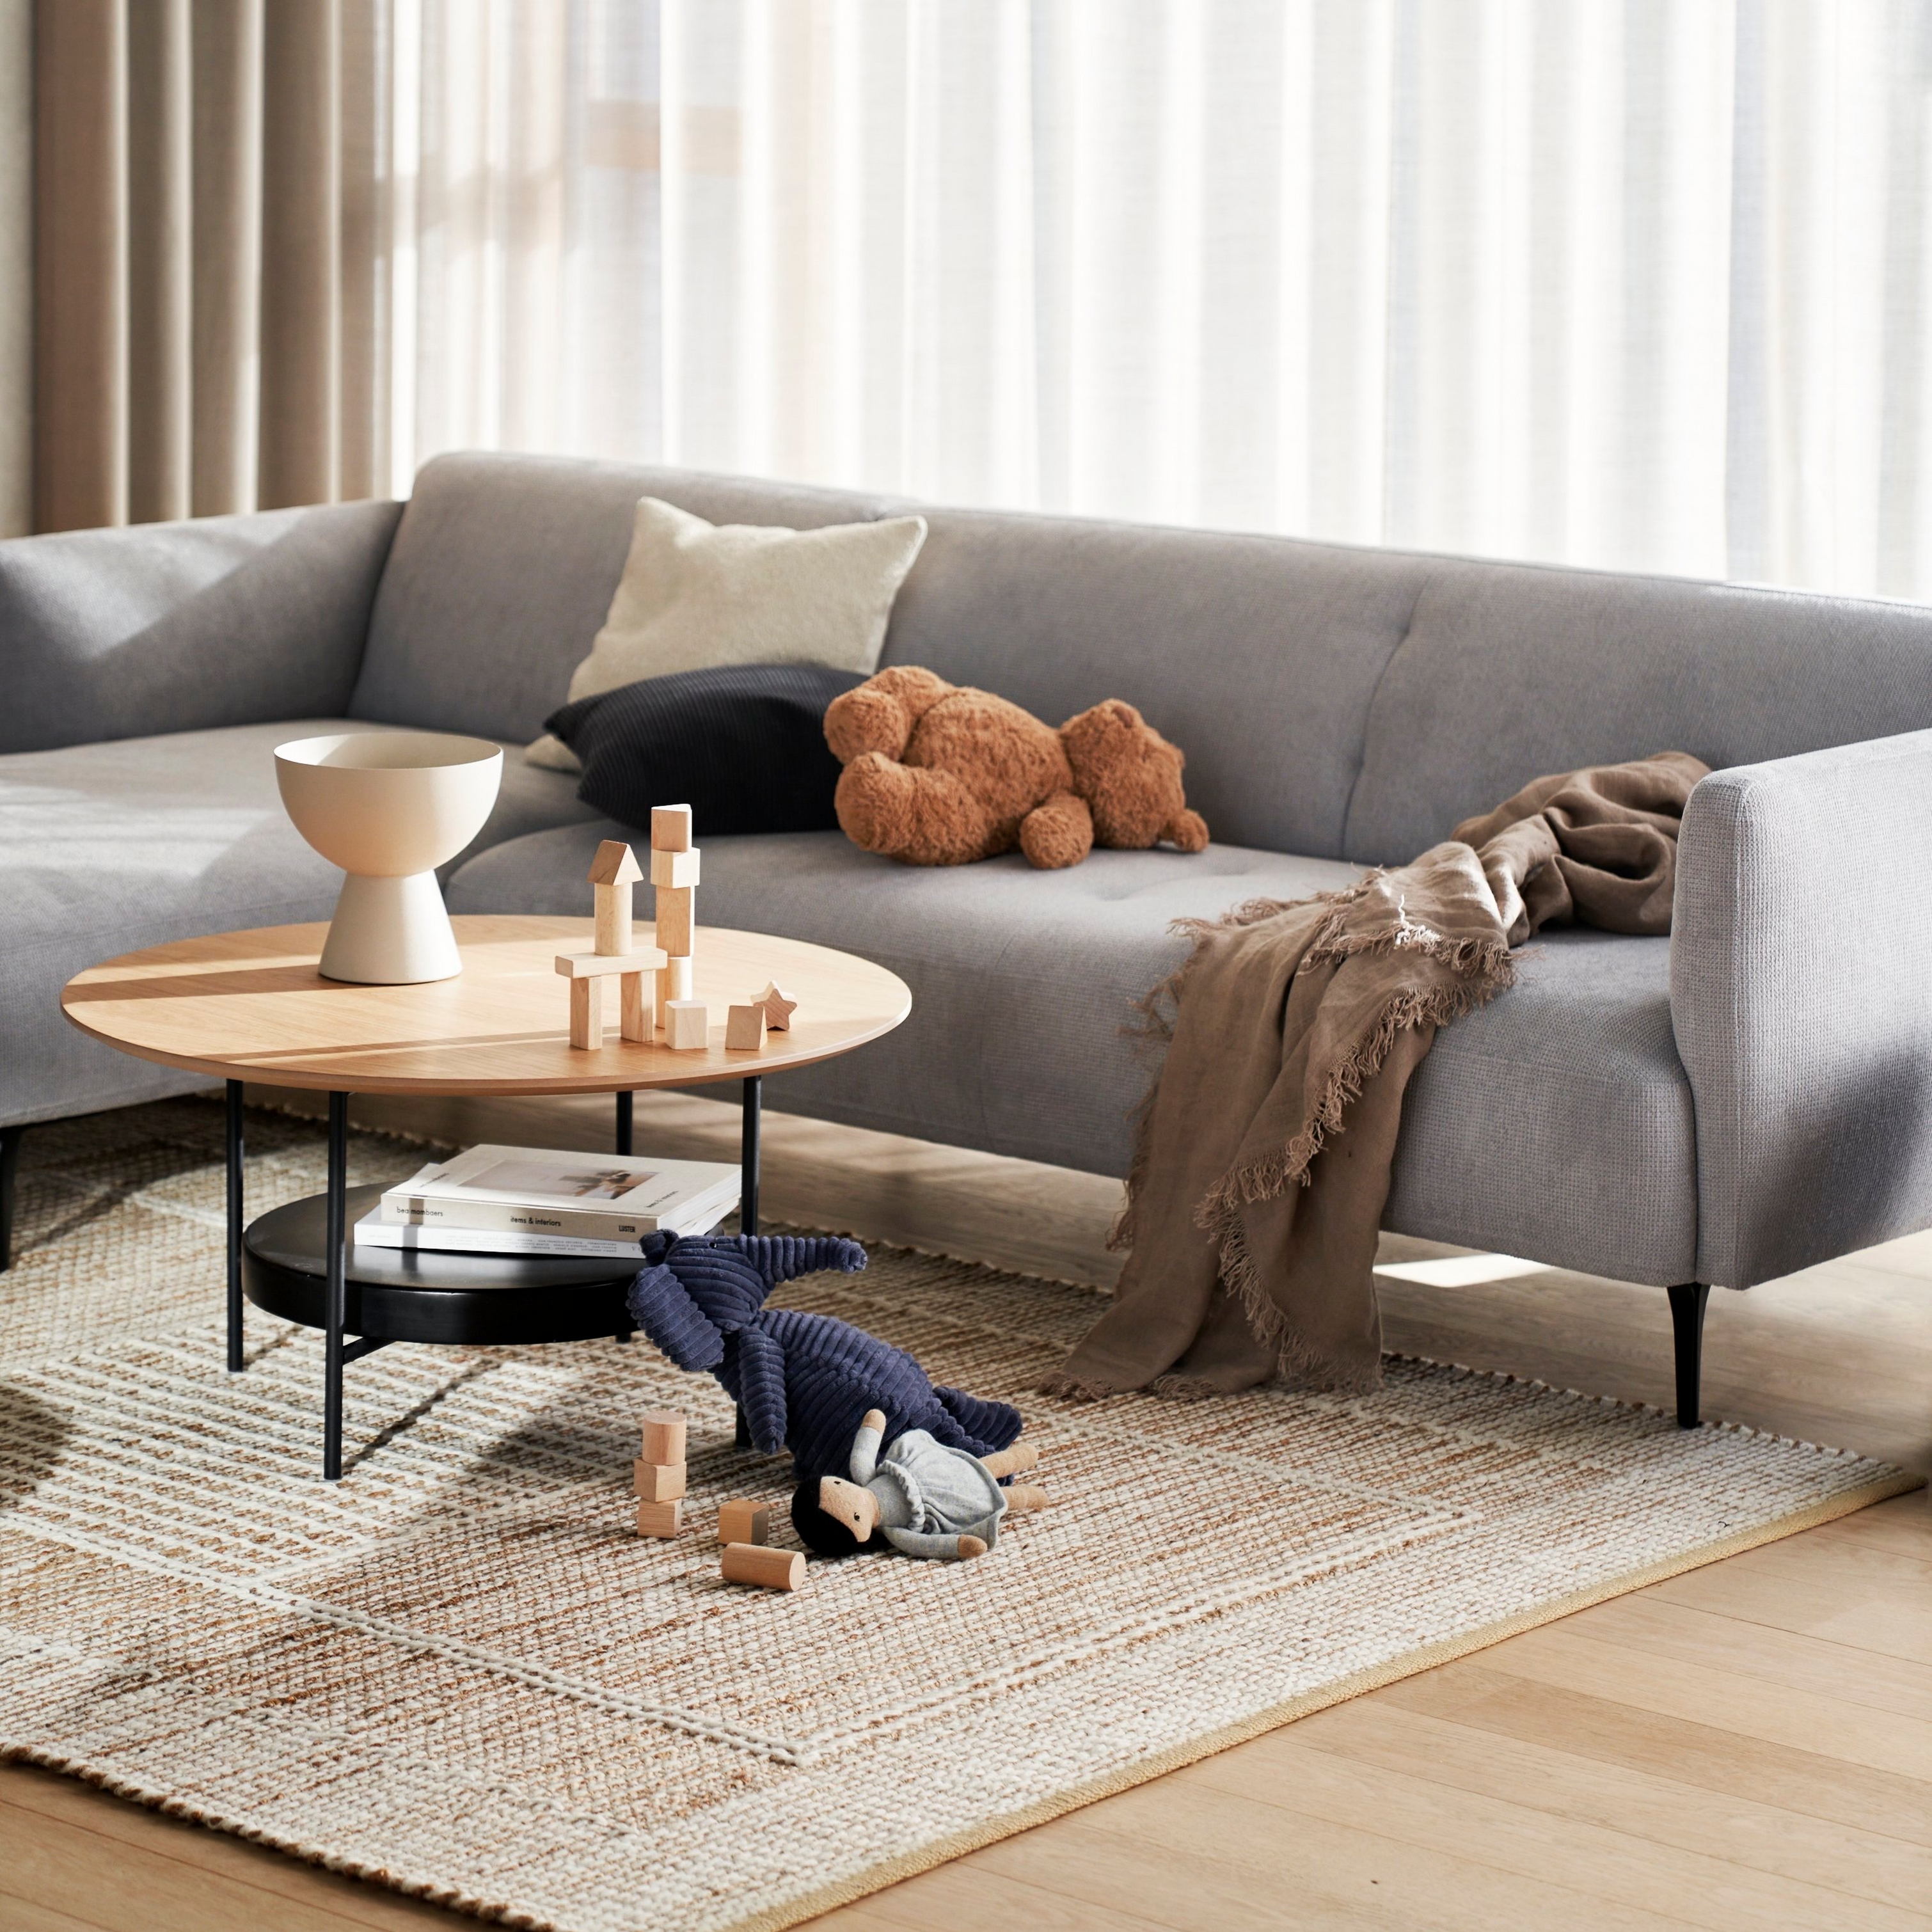 The Modena sofa in a cozy living room